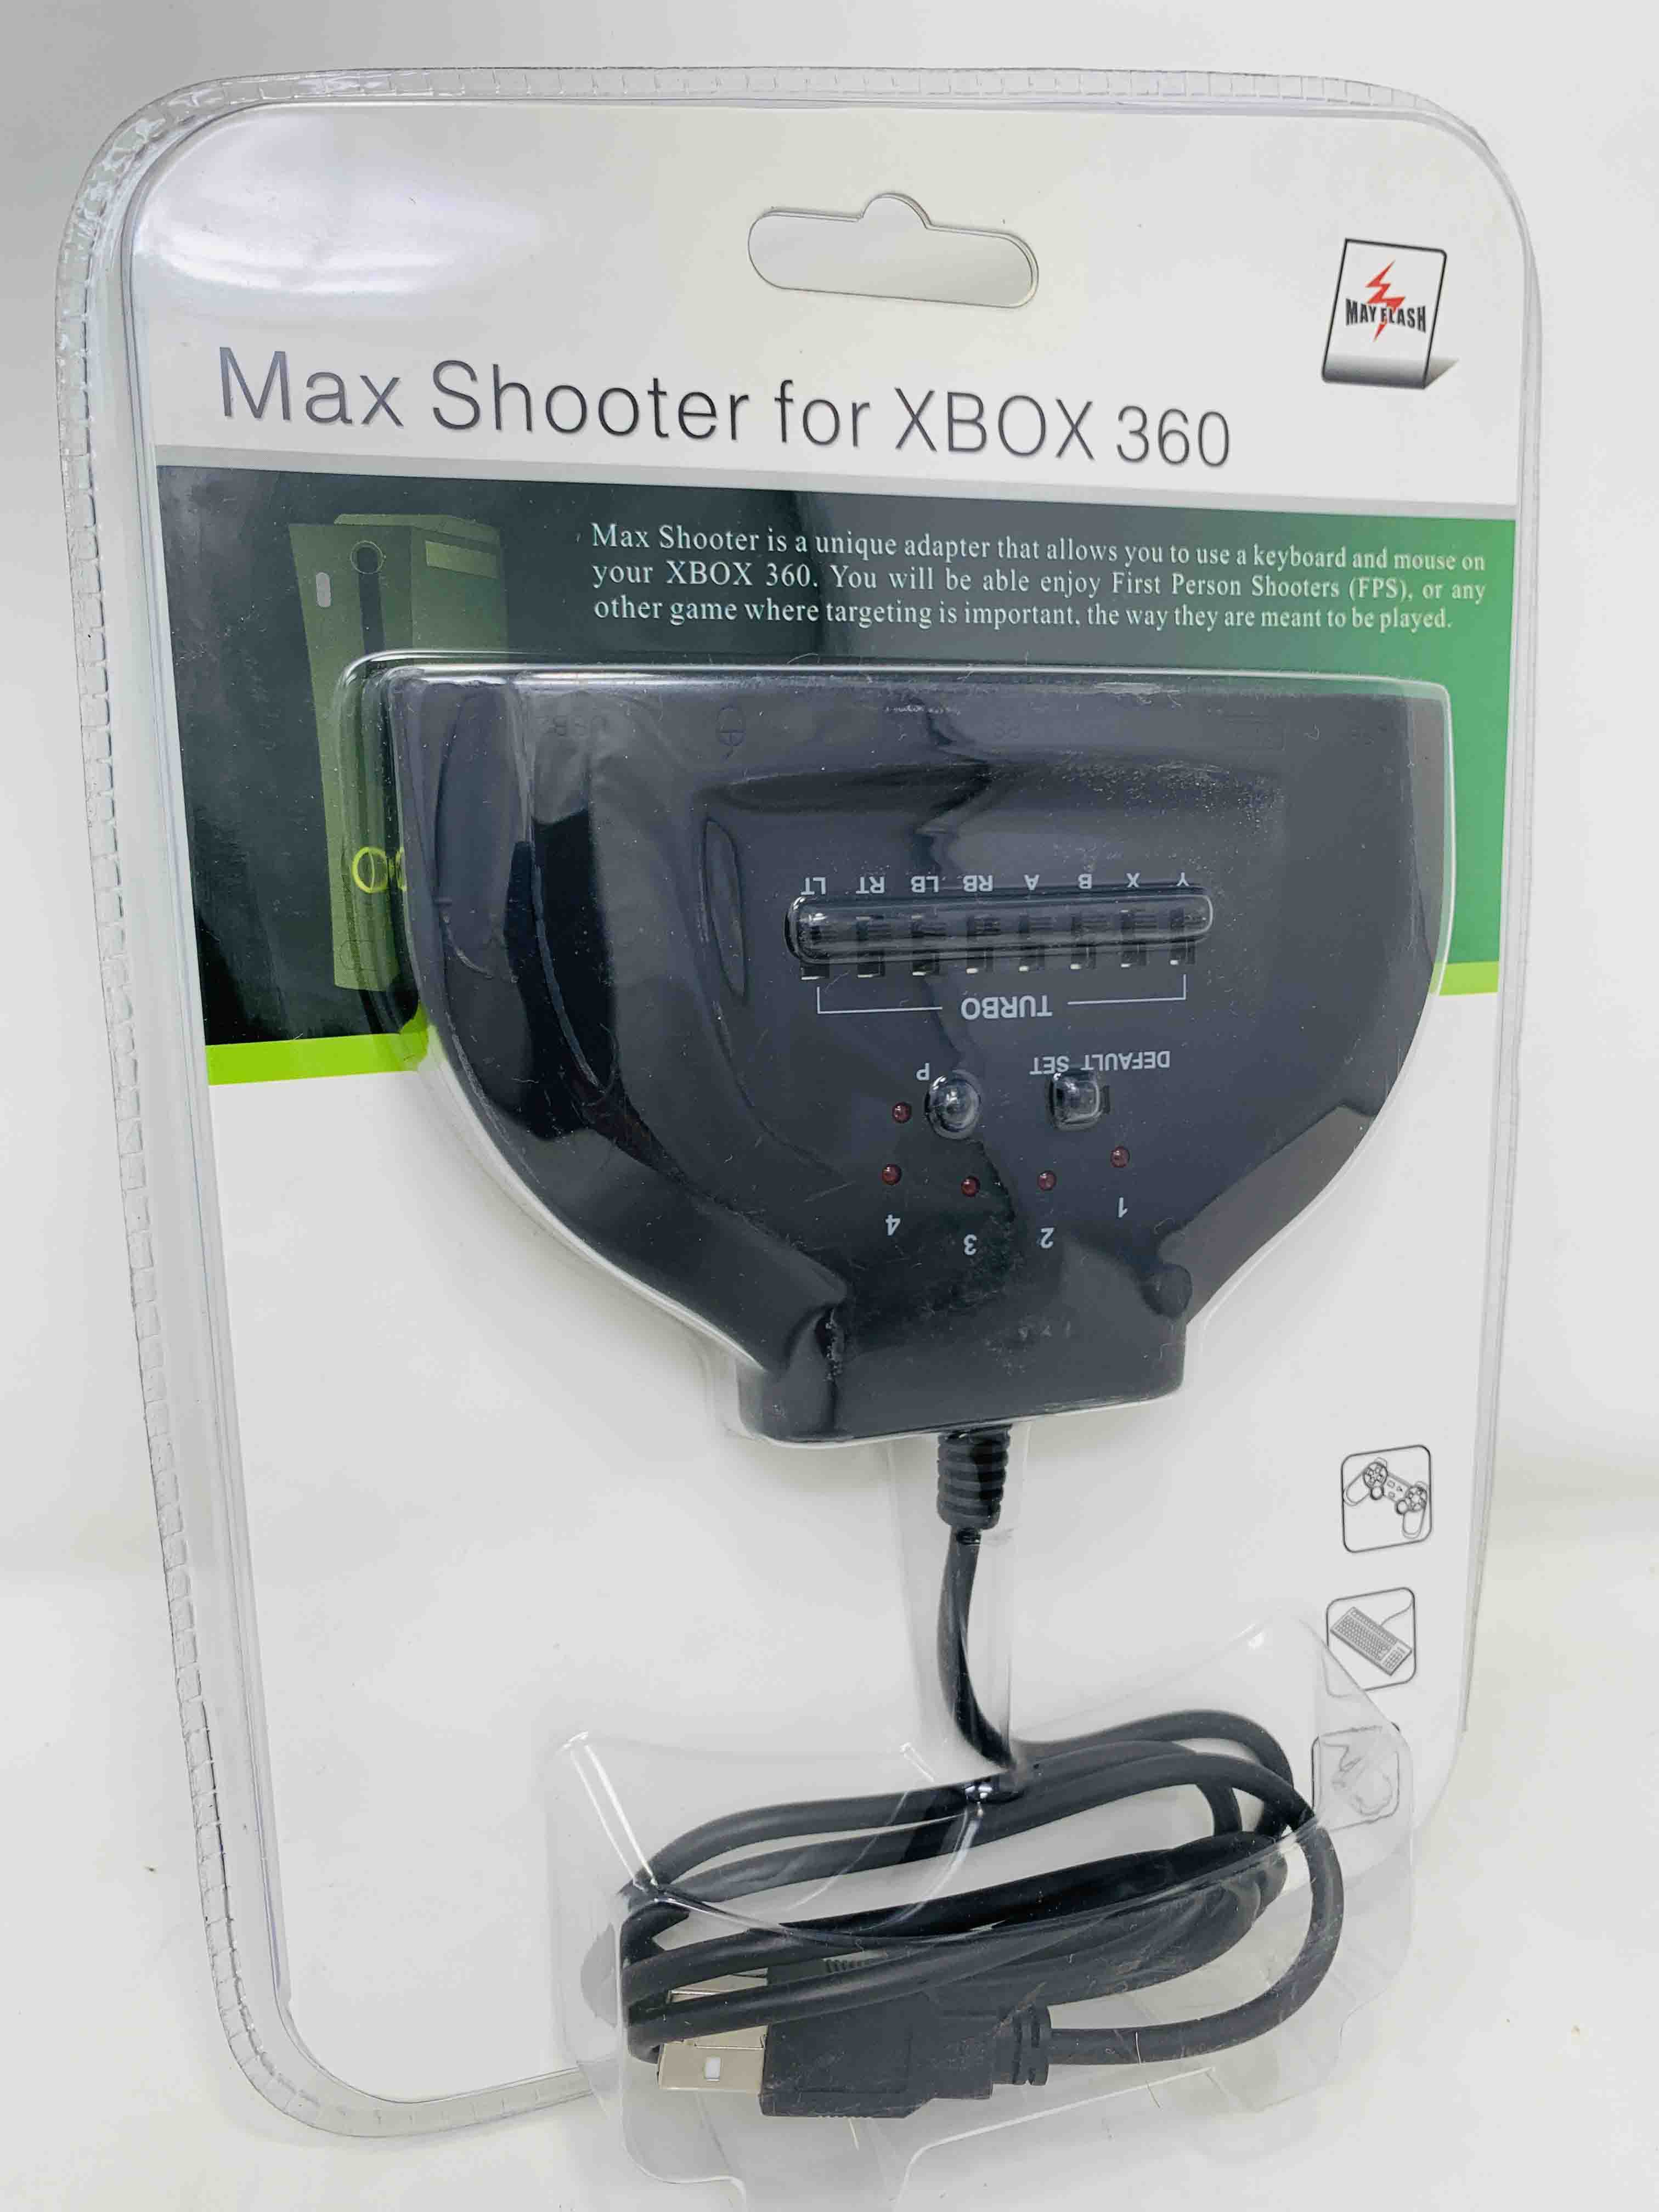 XBOX 360 USB Controller Adapter AKA Xbox 360 Max Shooter Pro by Mayflash